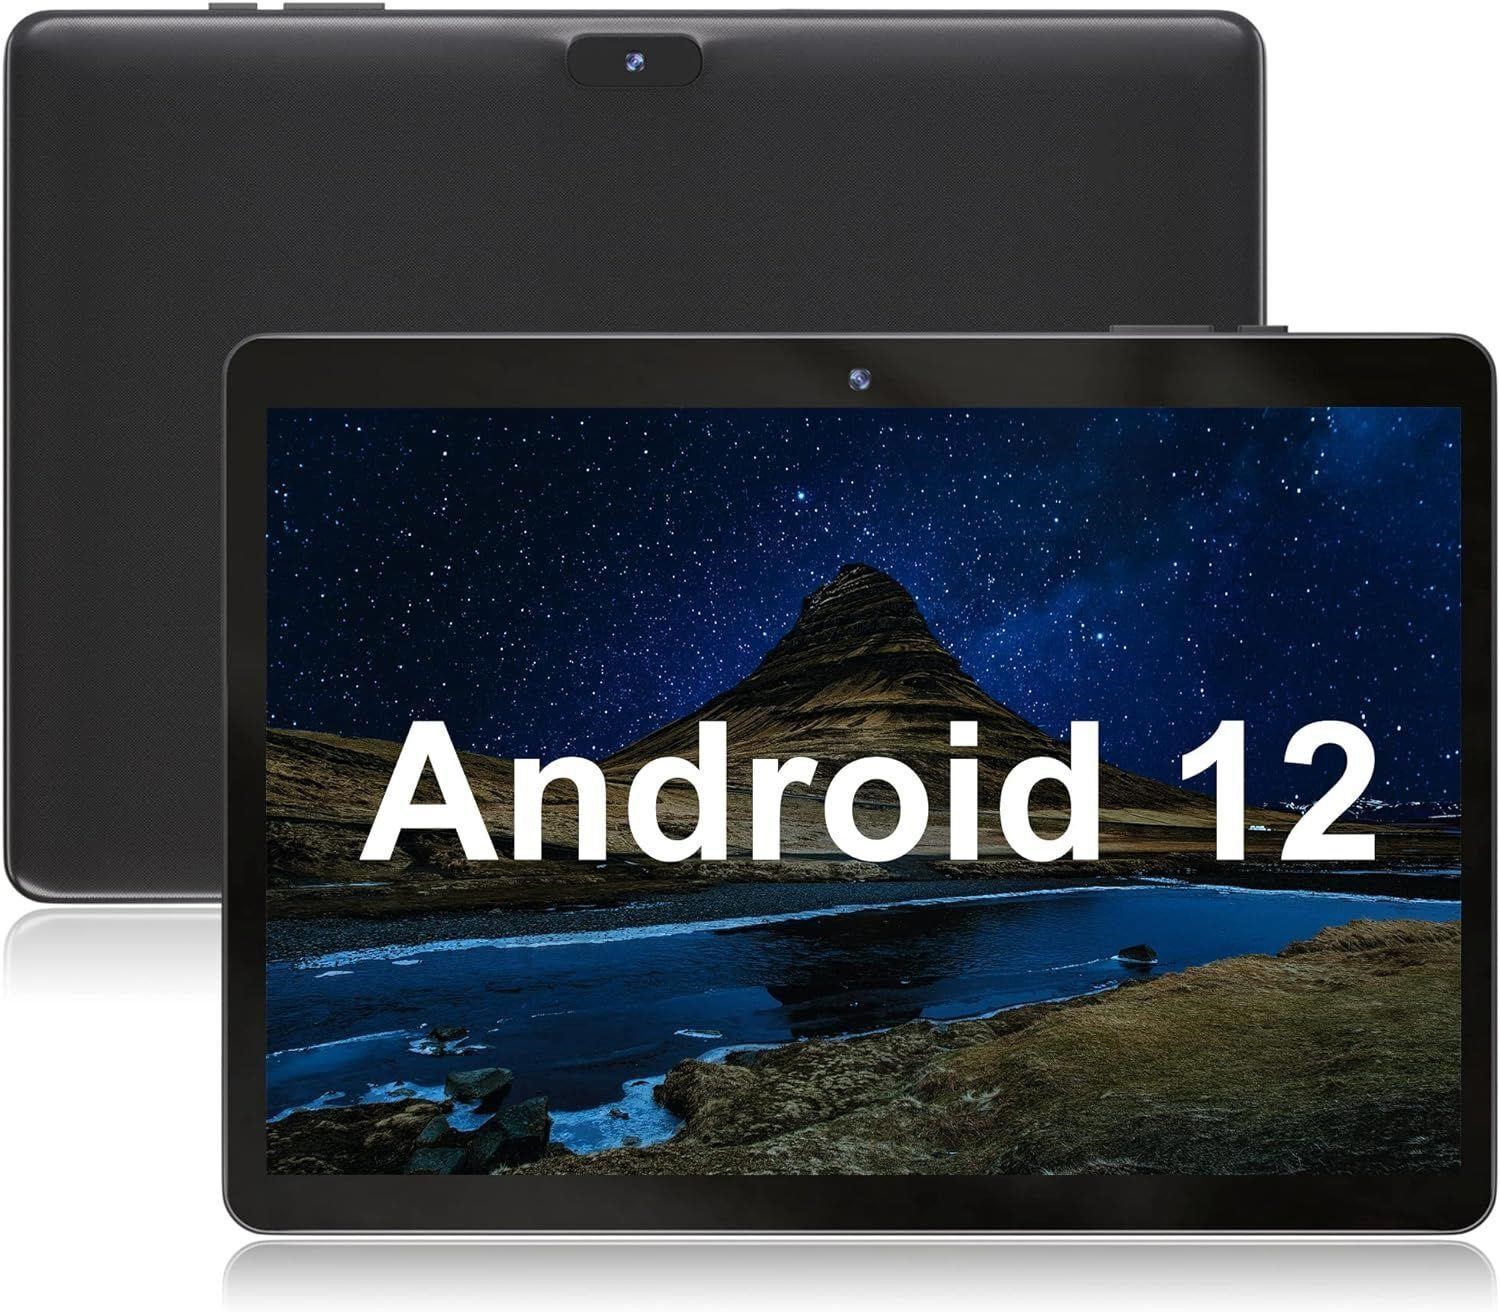 SEALED $137 10.1" Tablet Android 12